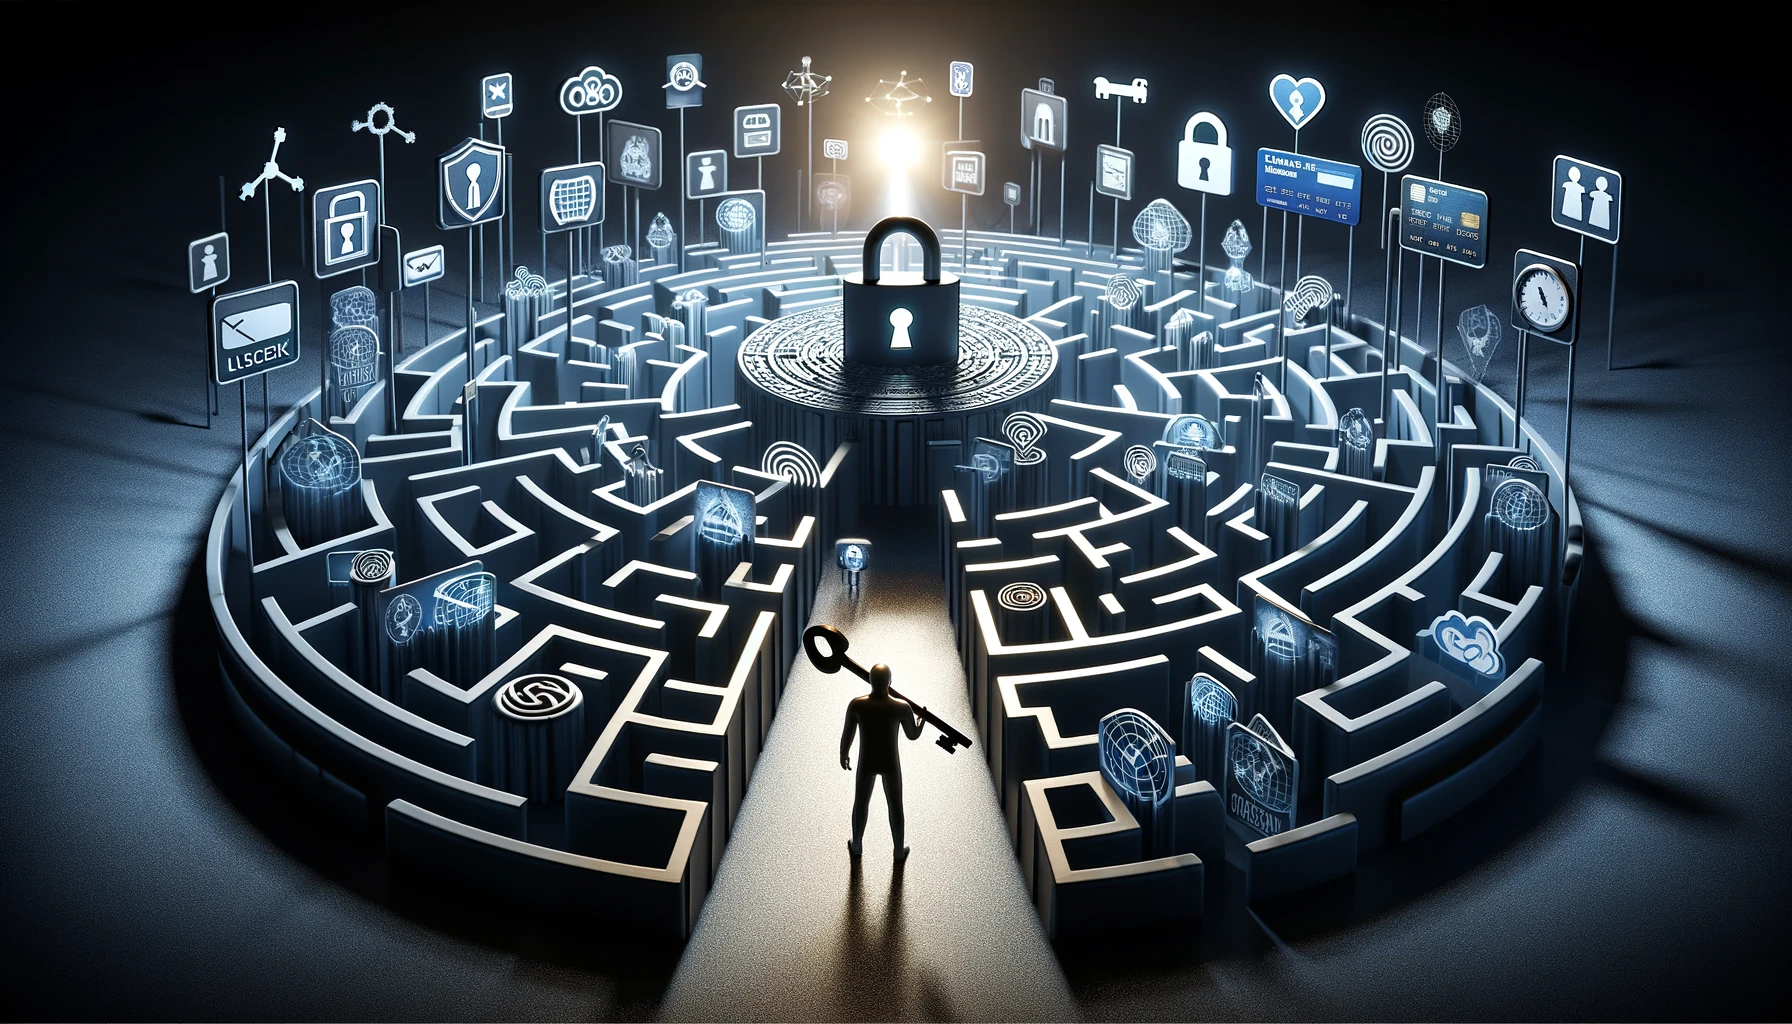 The image above conceptualizes social engineering through a 3D art piece, depicting the intricate challenges and risks associated with navigating the digital landscape to protect personal information.